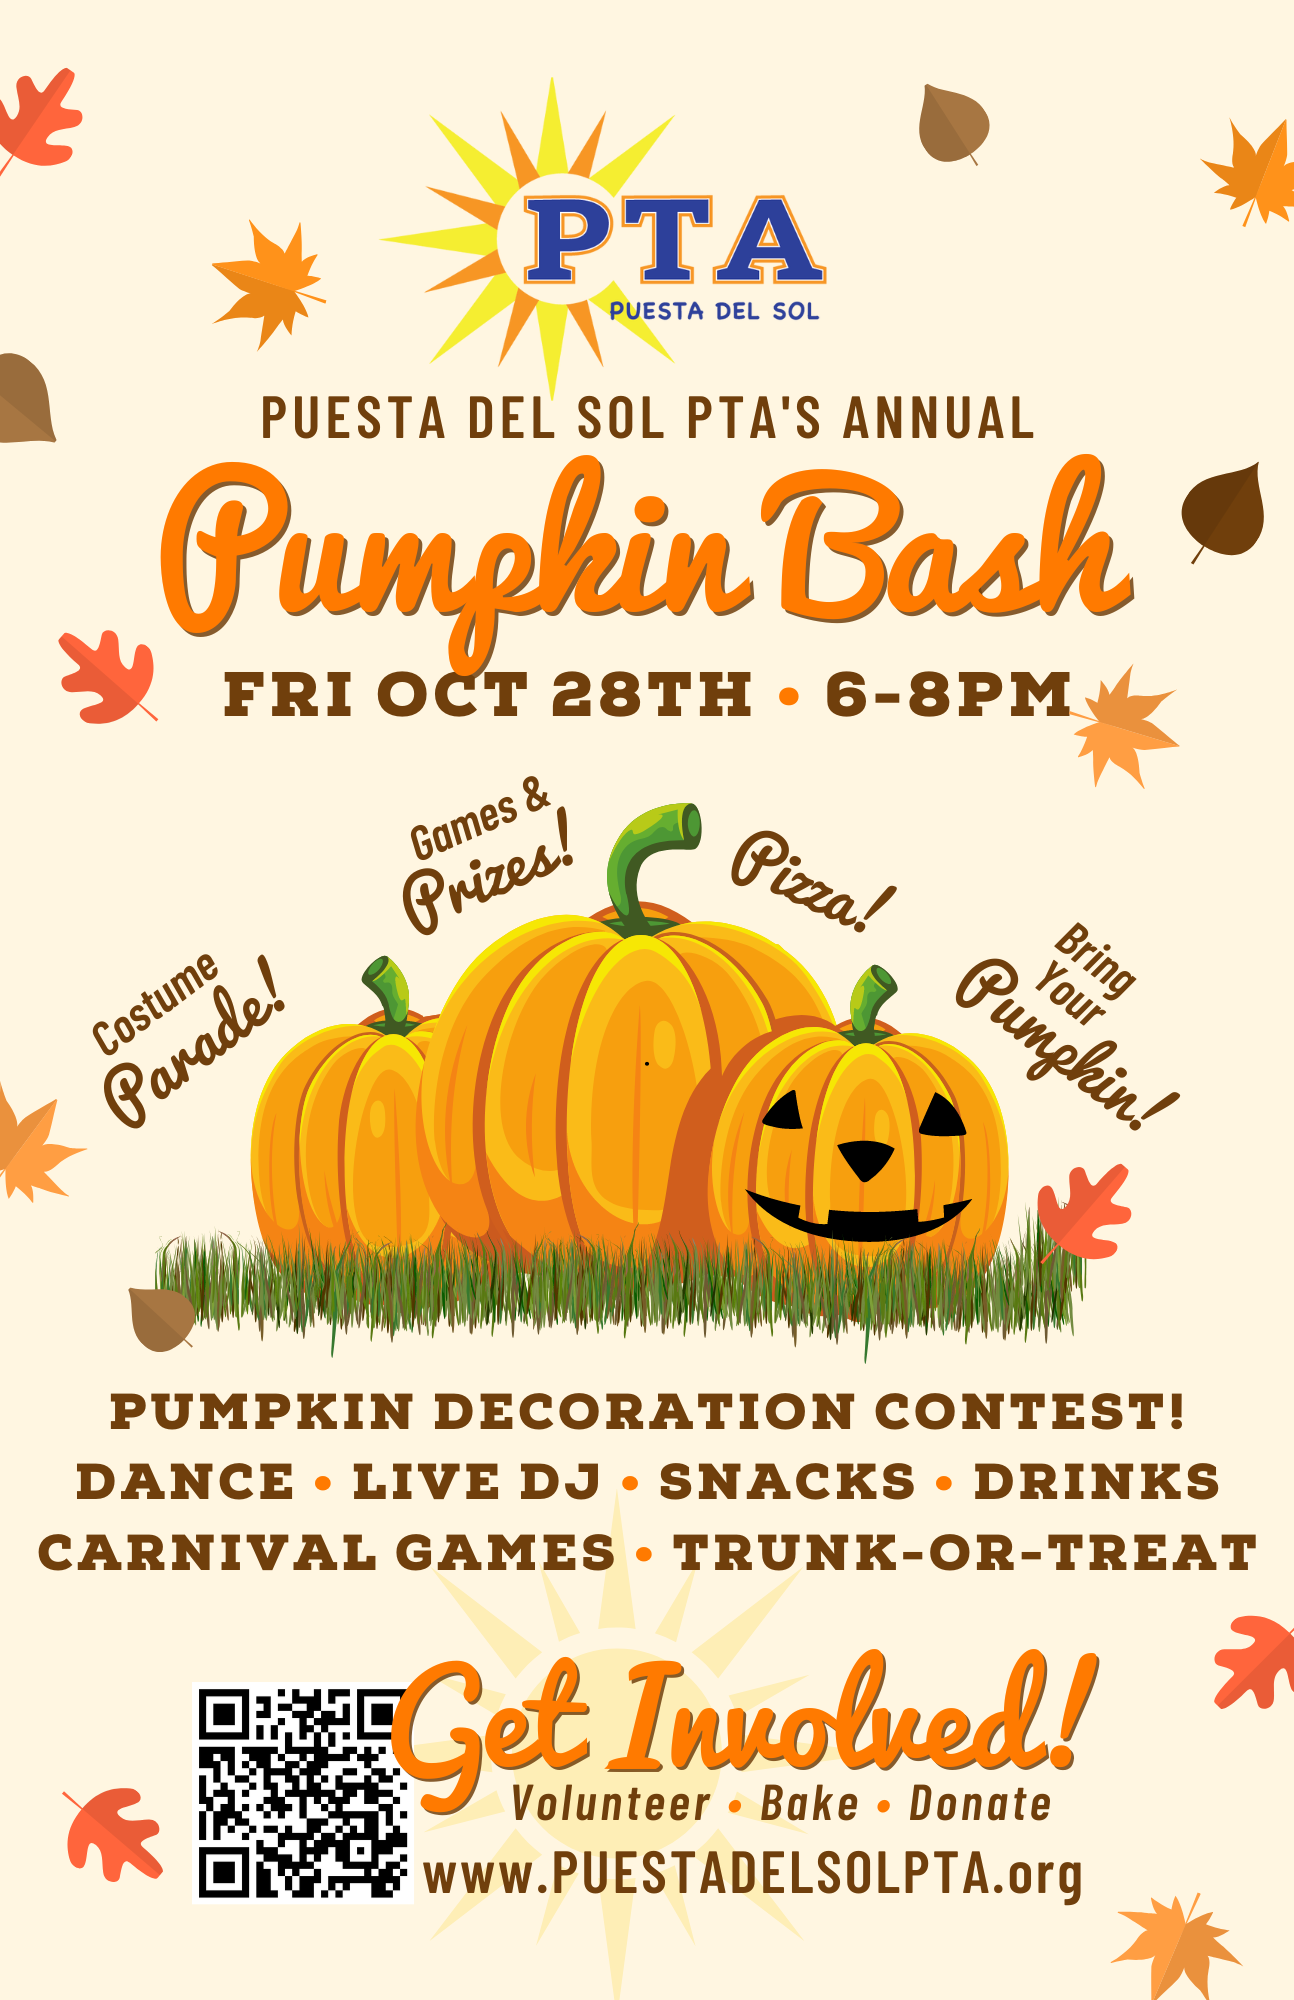 Pumpkin Bash Save the Date Friday, October 28th 6:00-8:00PM